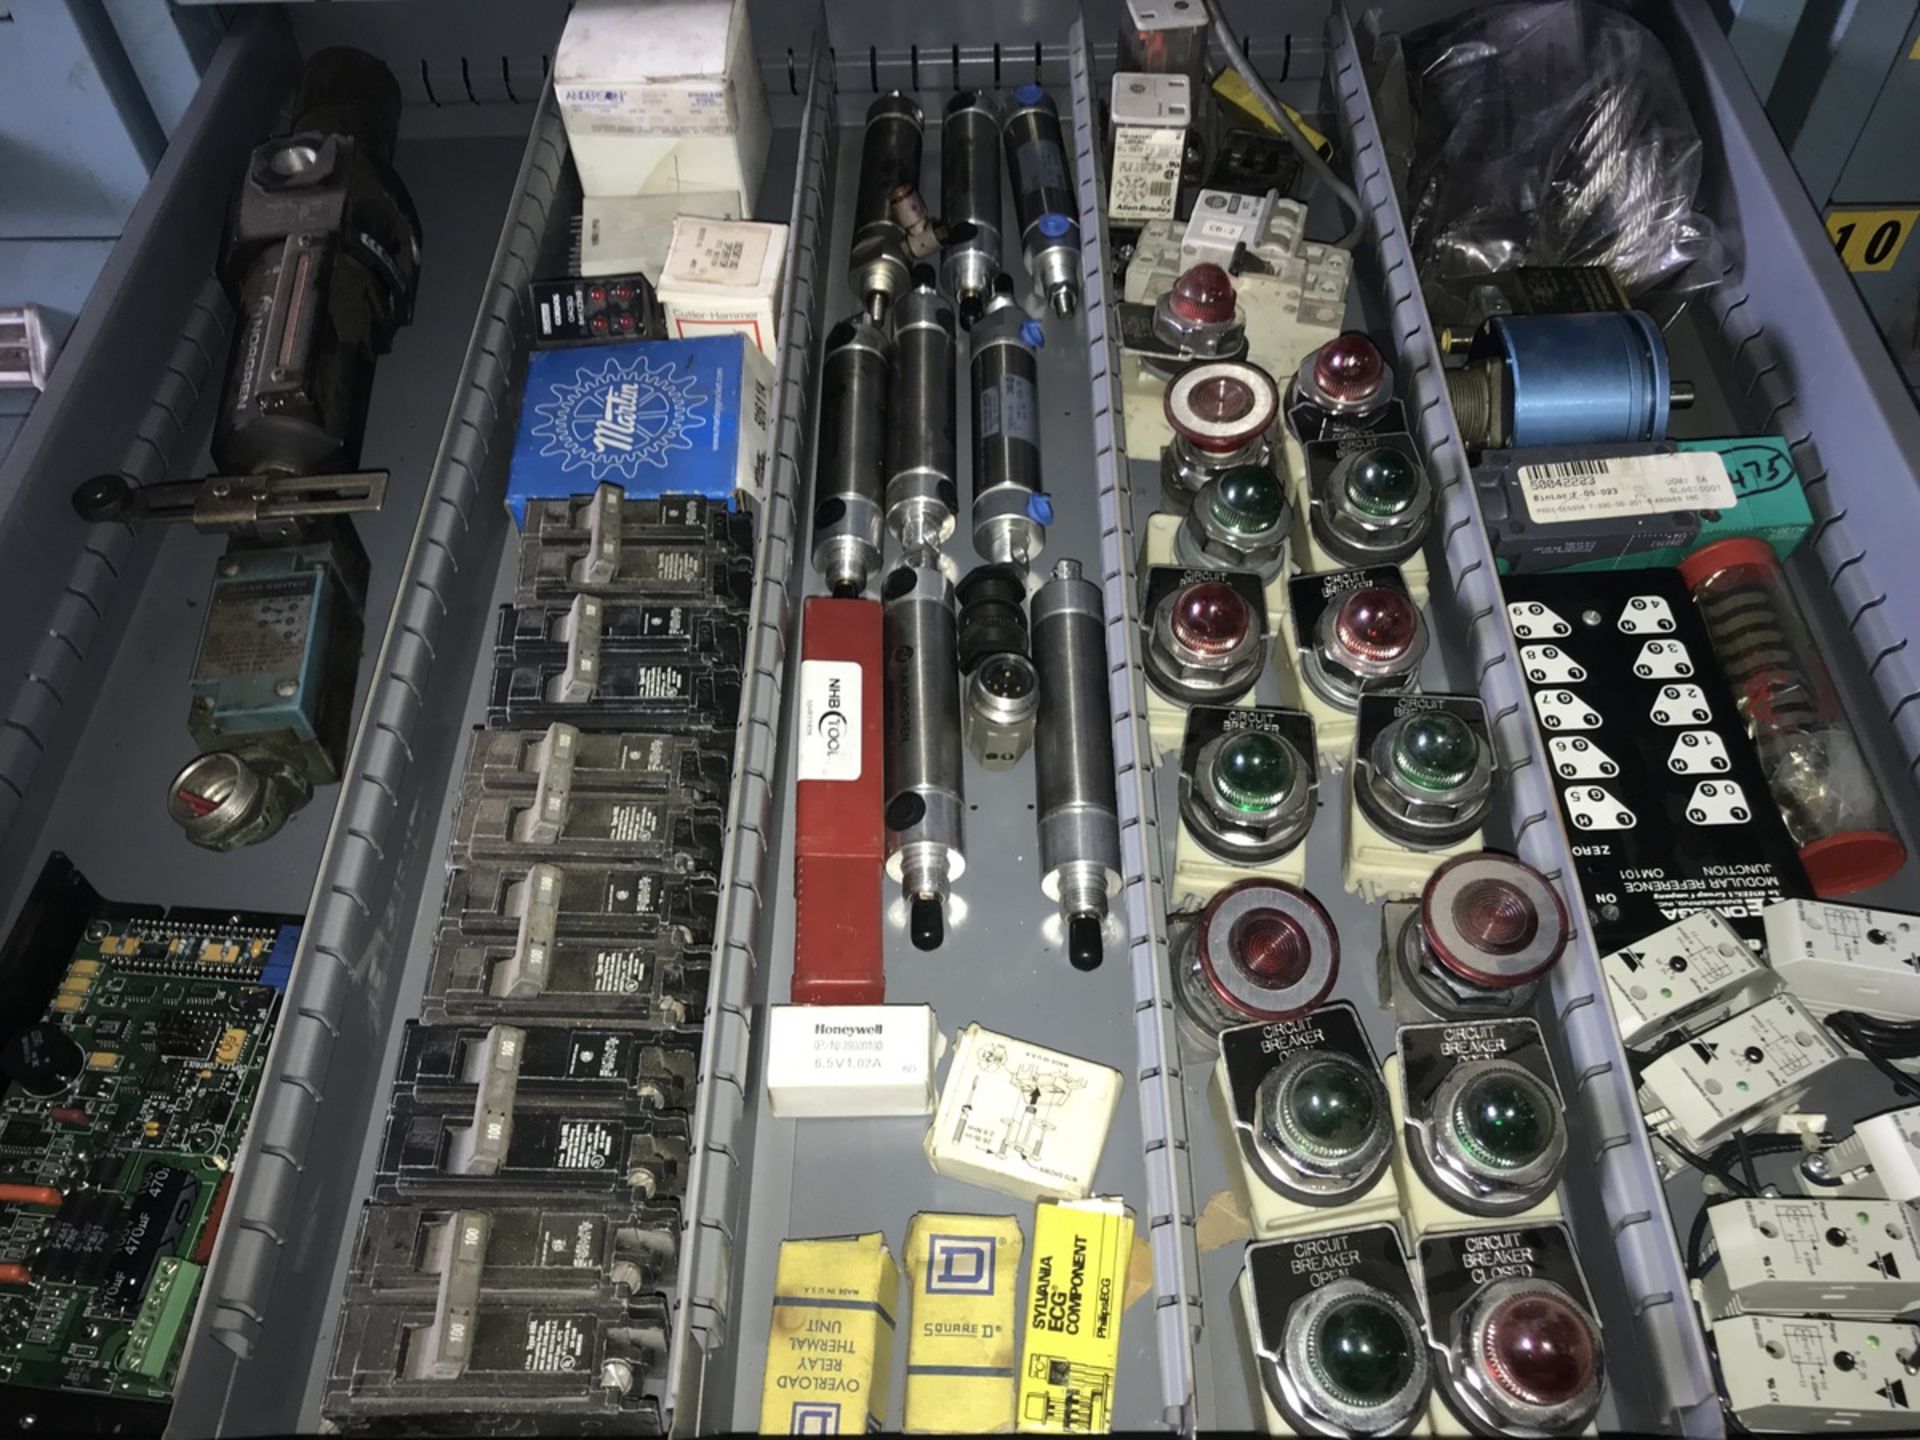 Contents of Drawer including Norgren valves, limit switches, Allen Bradley operation lights,